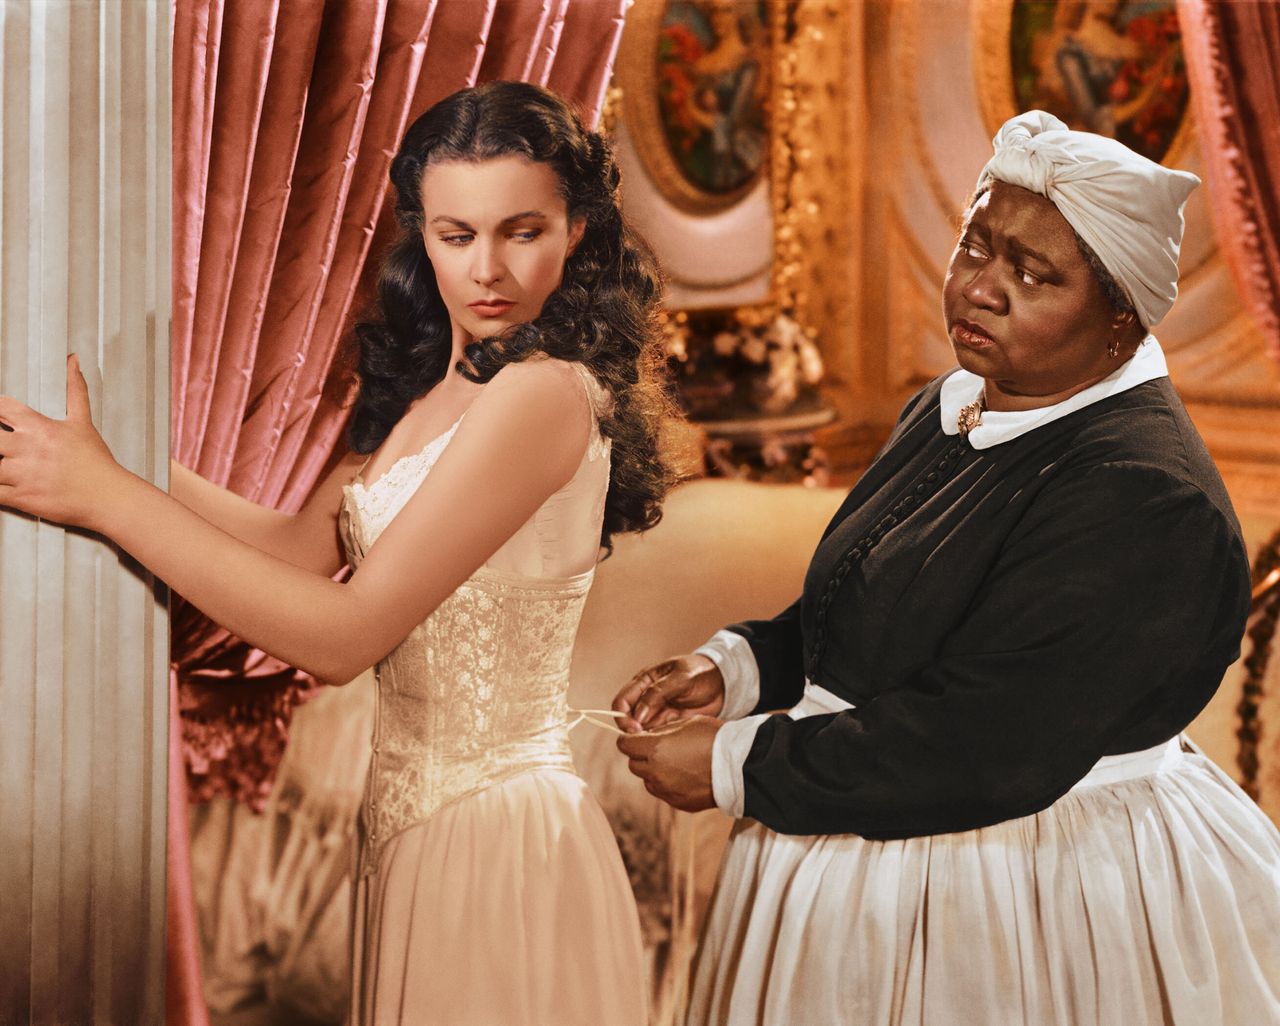 Gone With The Wind has been a focus of the criticism over Black representation in classic film and TV.